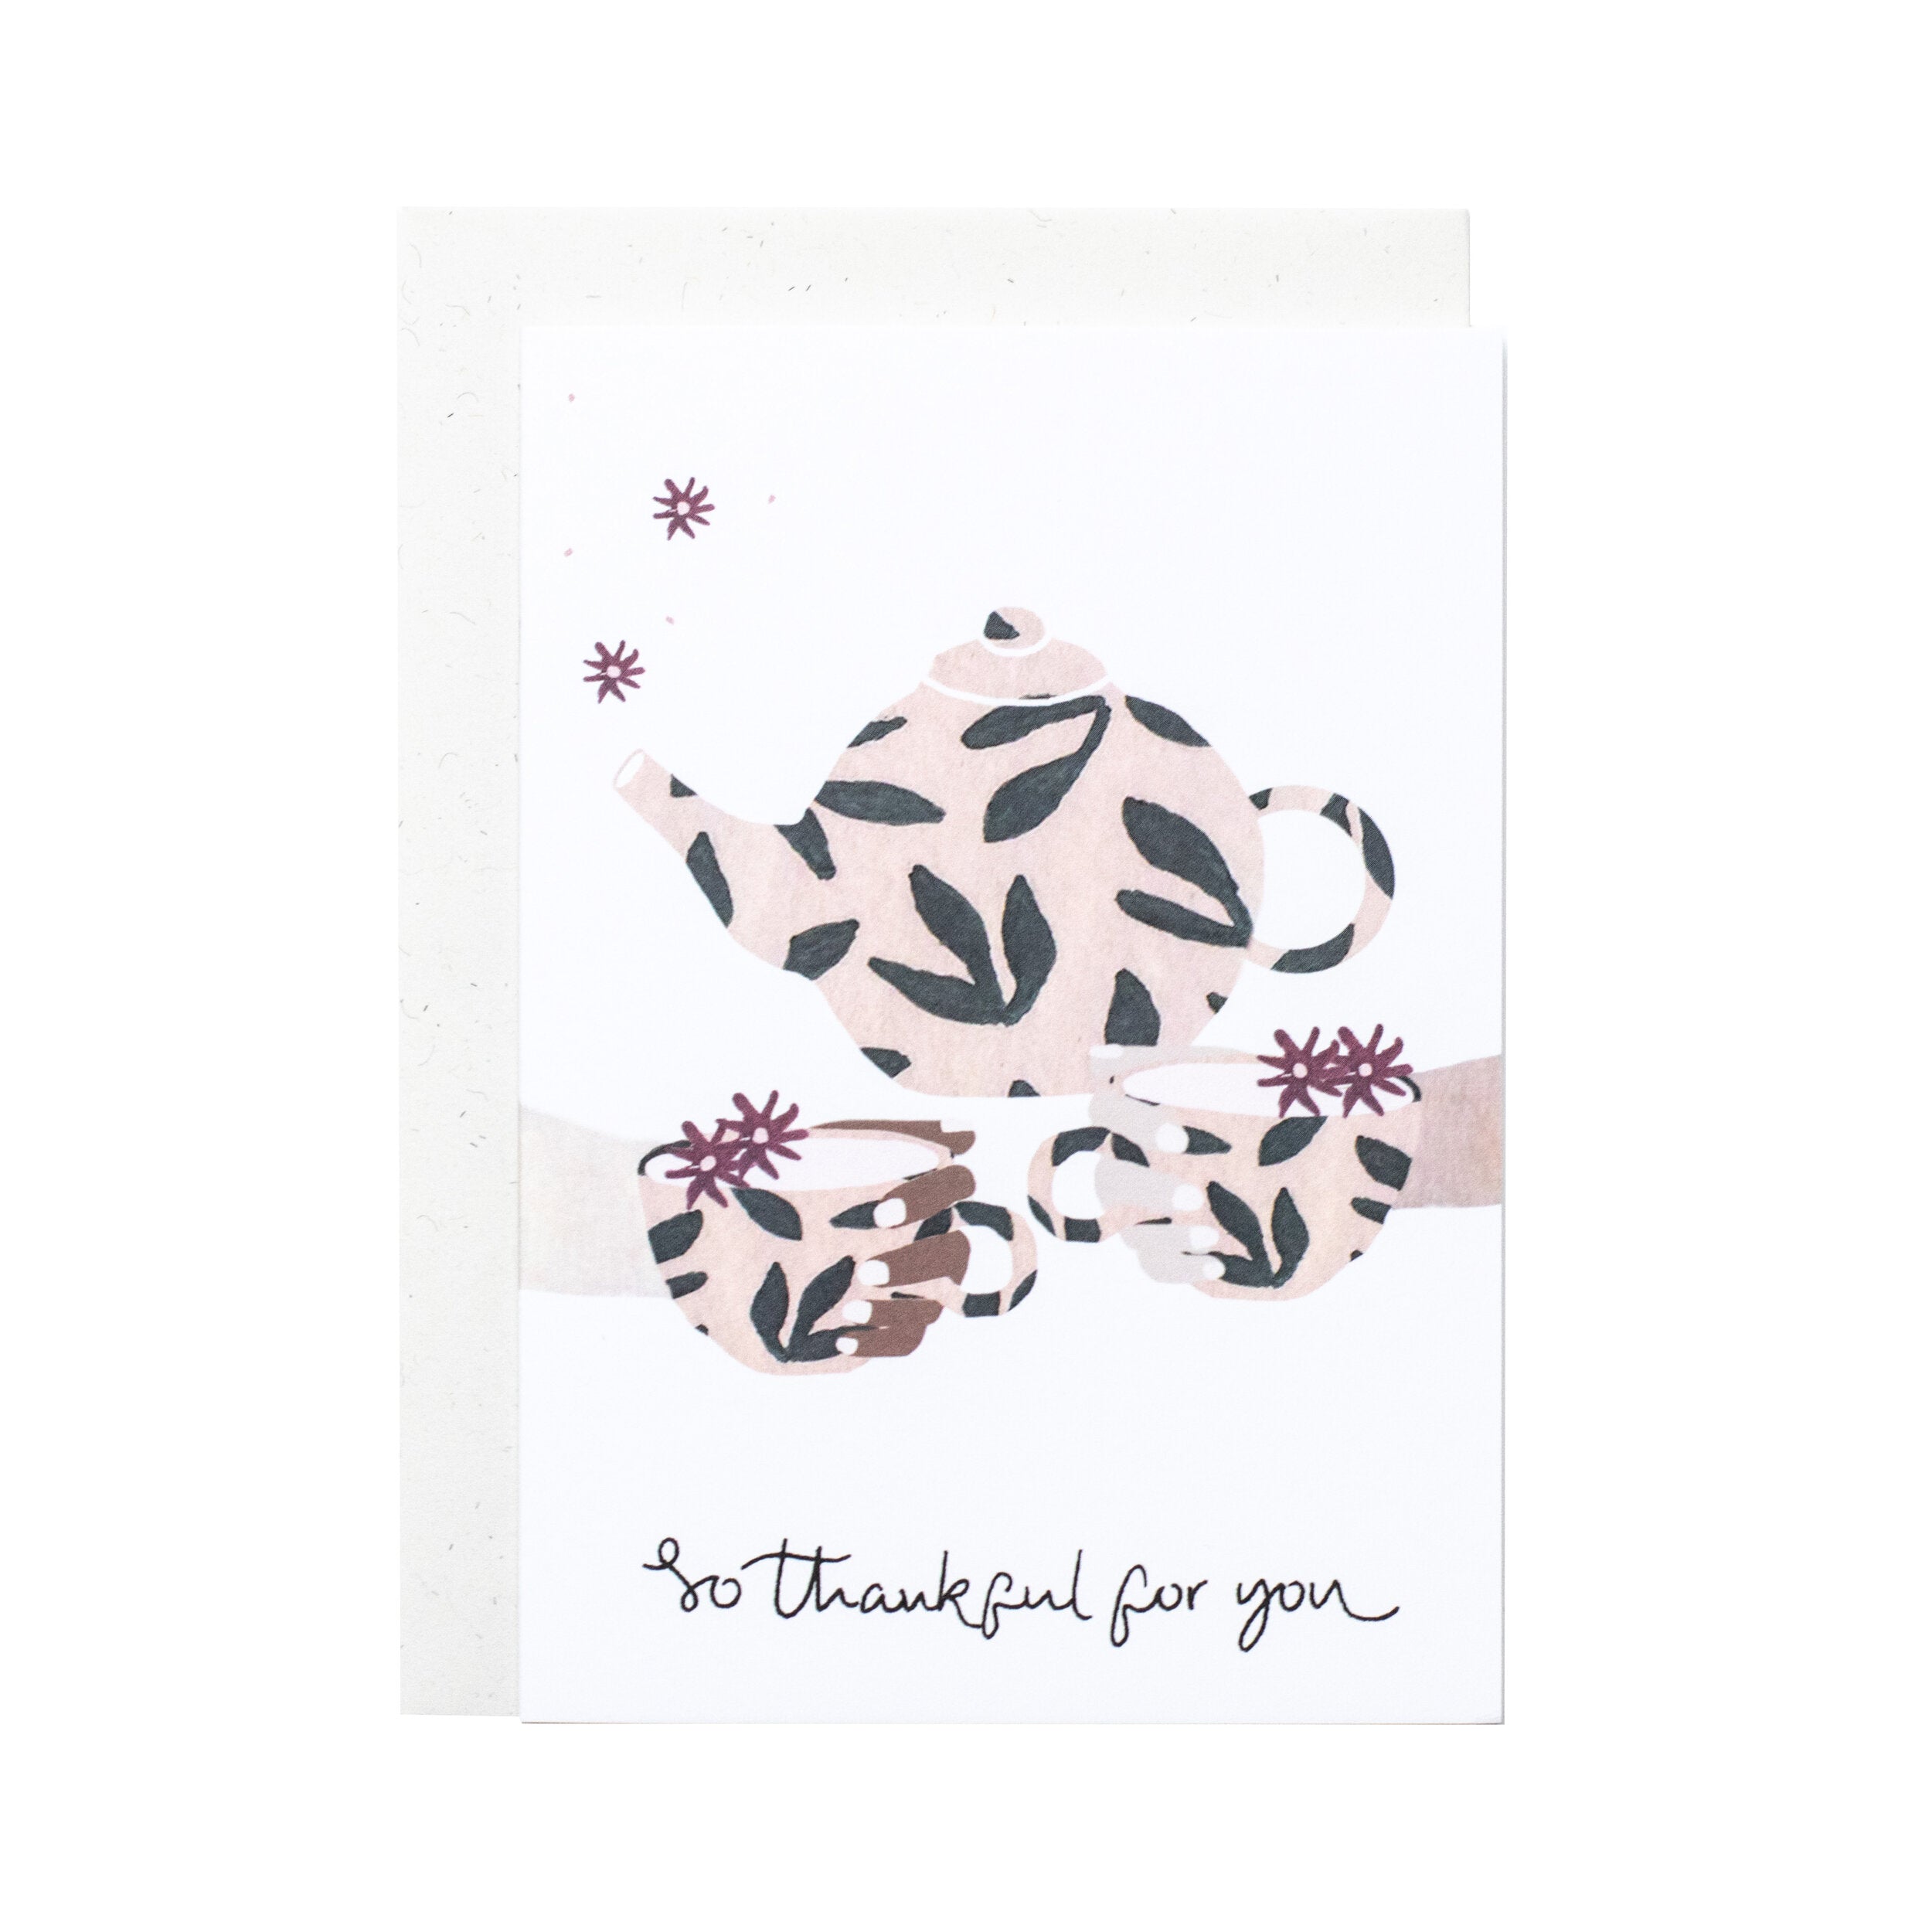 'So Thankful For You' Greetings Card